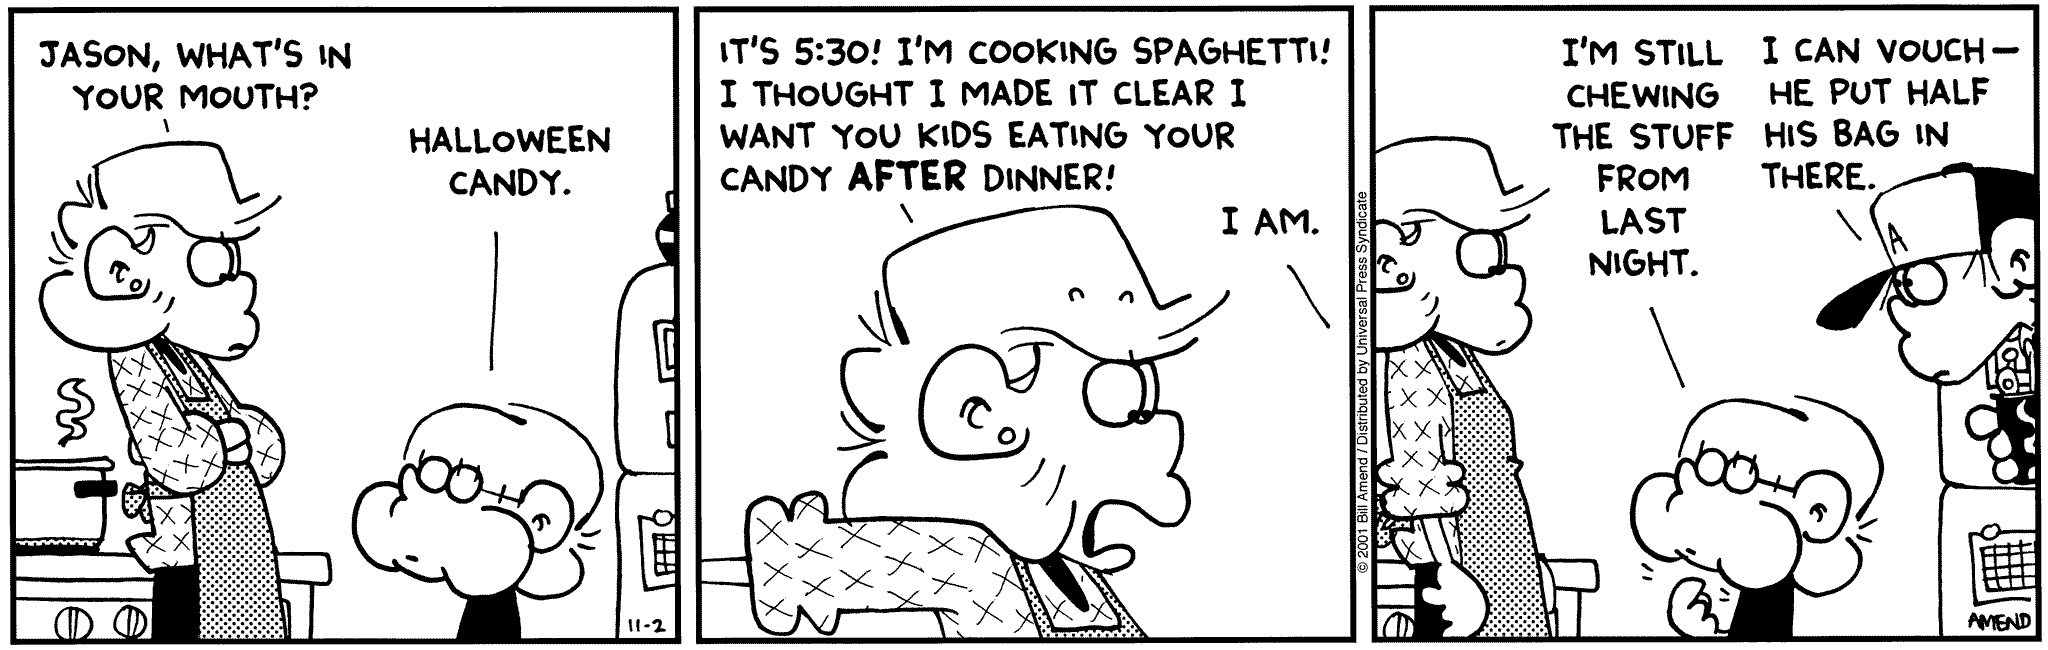 Halloween Comics - FoxTrot comic strip by Bill Amend - Published November 2, 2001 - Andy Fox: Jason, what's in your mouth? Jason Fox: Halloween candy. Jason Fox: It's 5:30! I'm cooking spaghetti! I thought I made it clear I want you kids eating your candy after dinner! Jason Fox: I am. I'm still chewing the stuff from last night. Peter Fox: I can vouch, he put half his bag in there.